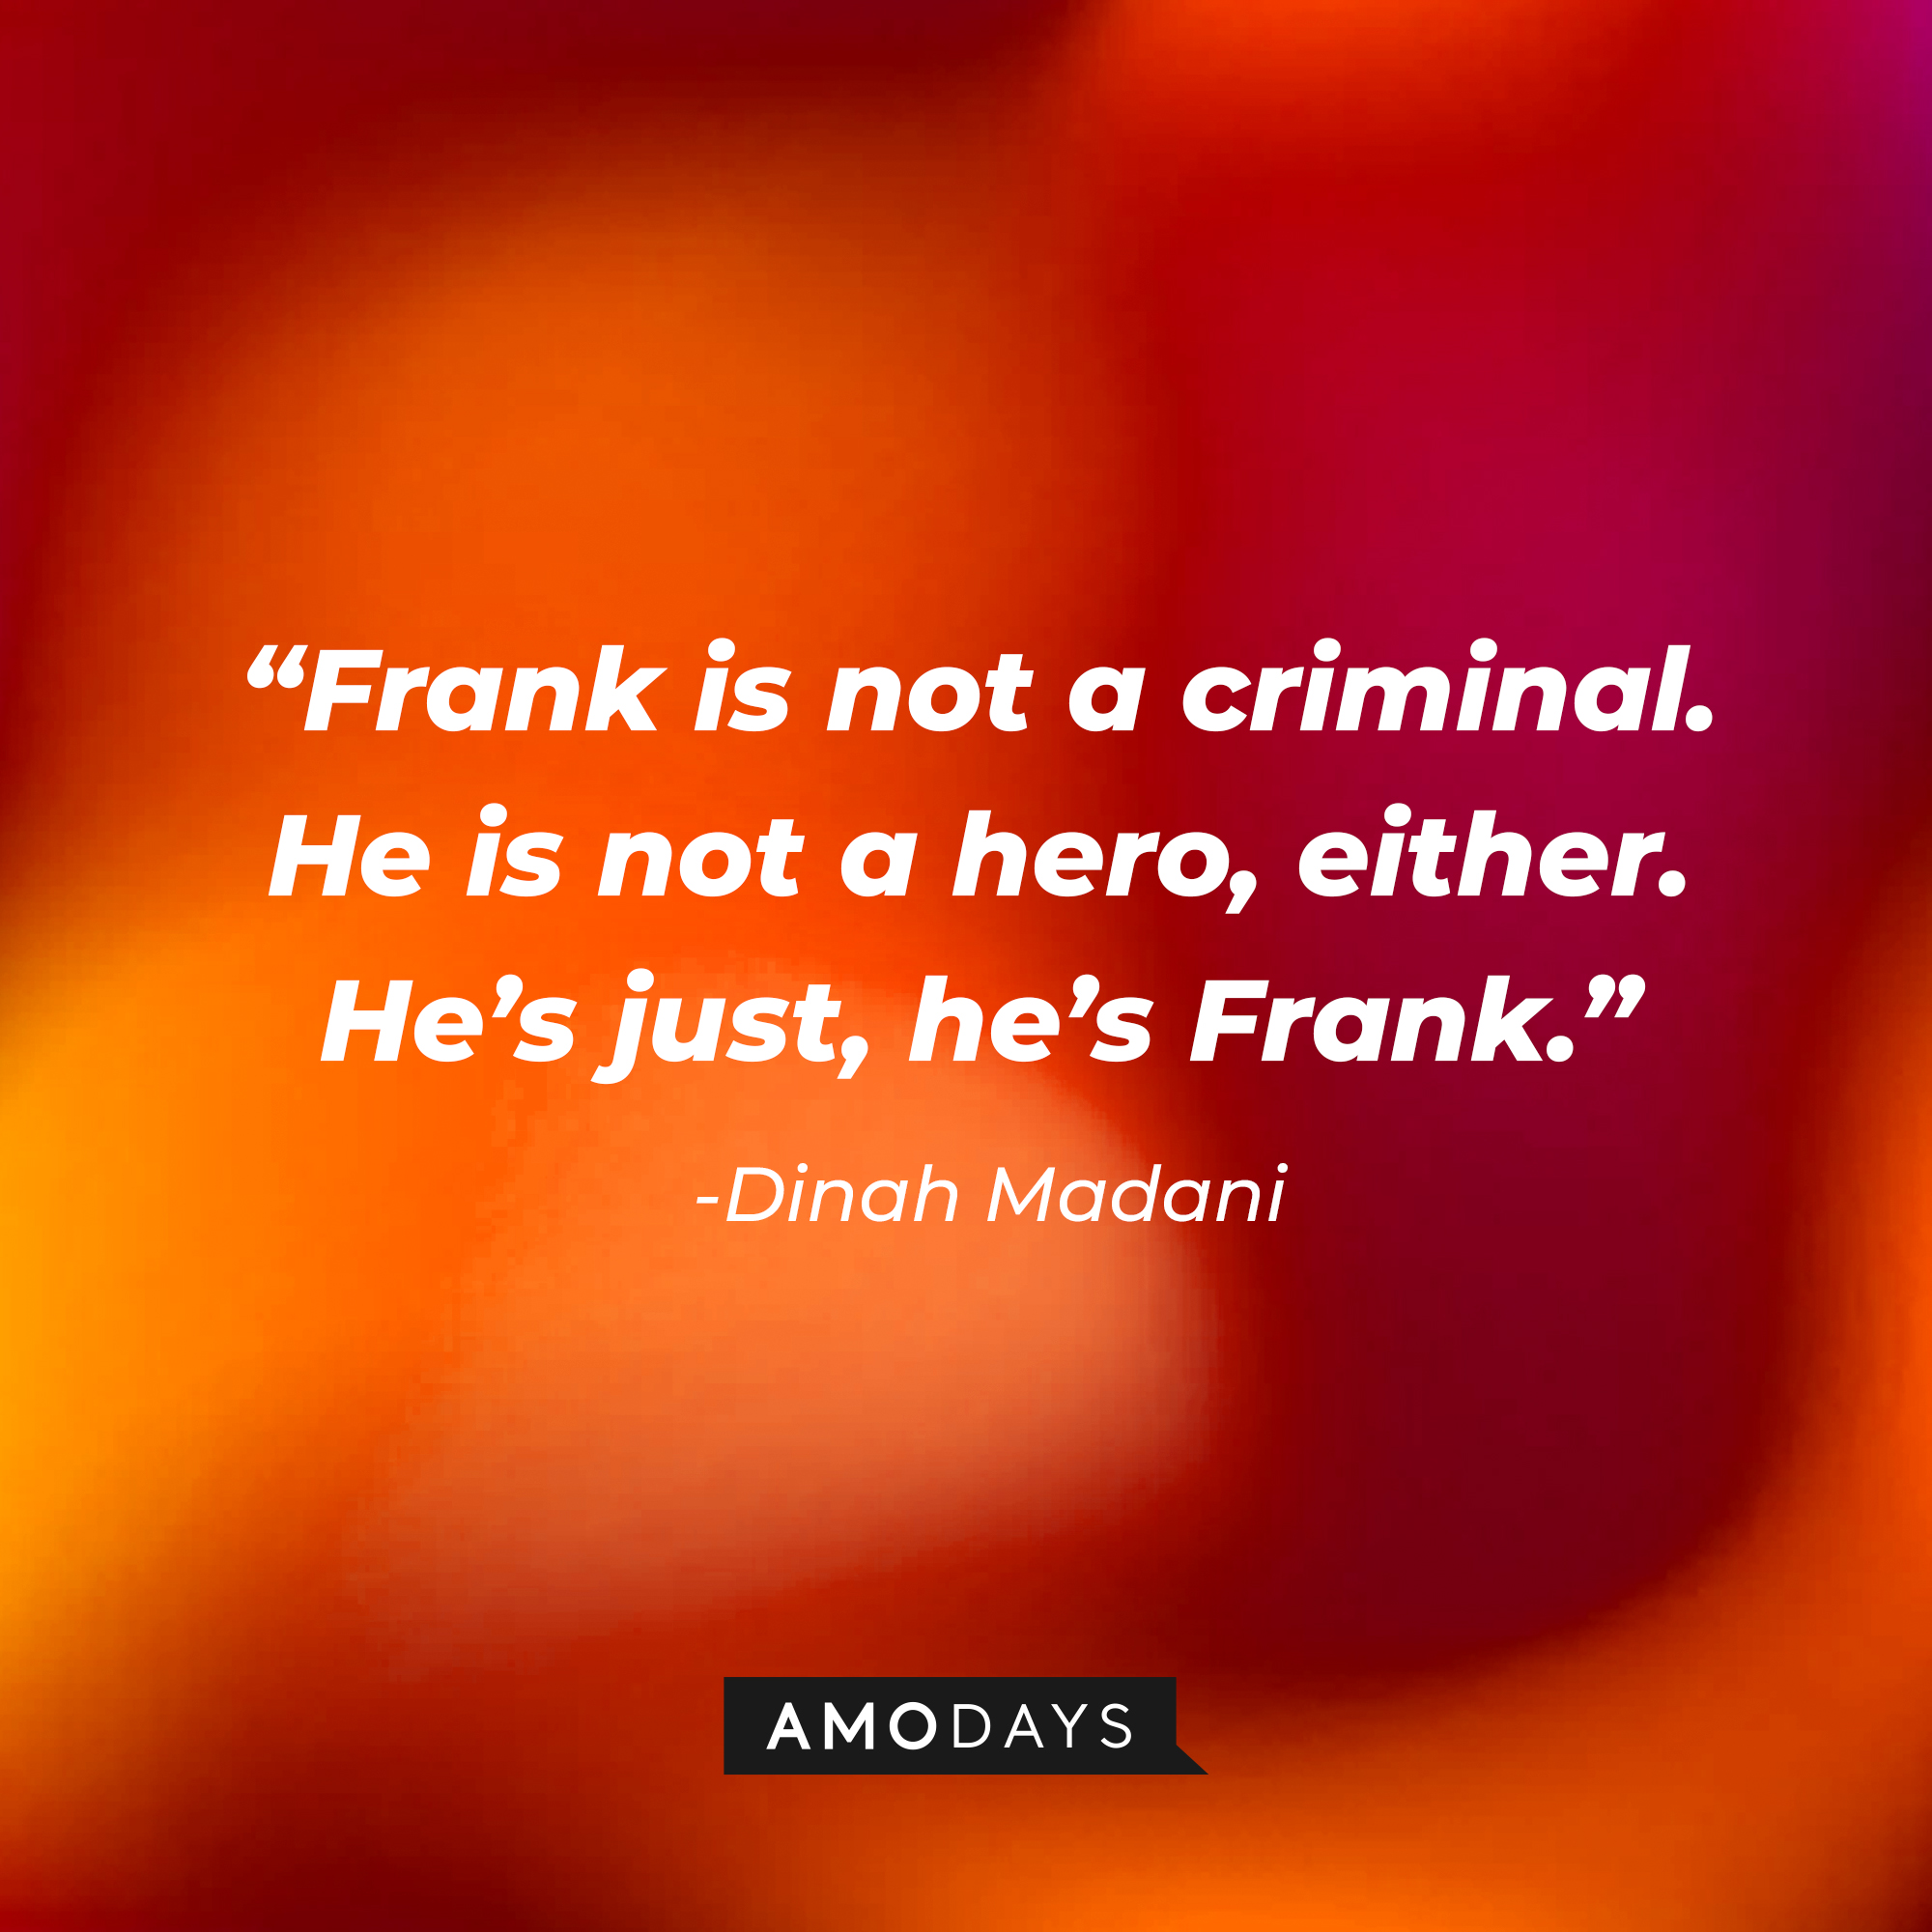 Dinah Madani’s quote: “Frank is not a criminal. He is not a hero either. He’s just, he’s Frank.” | Source: AmoDays